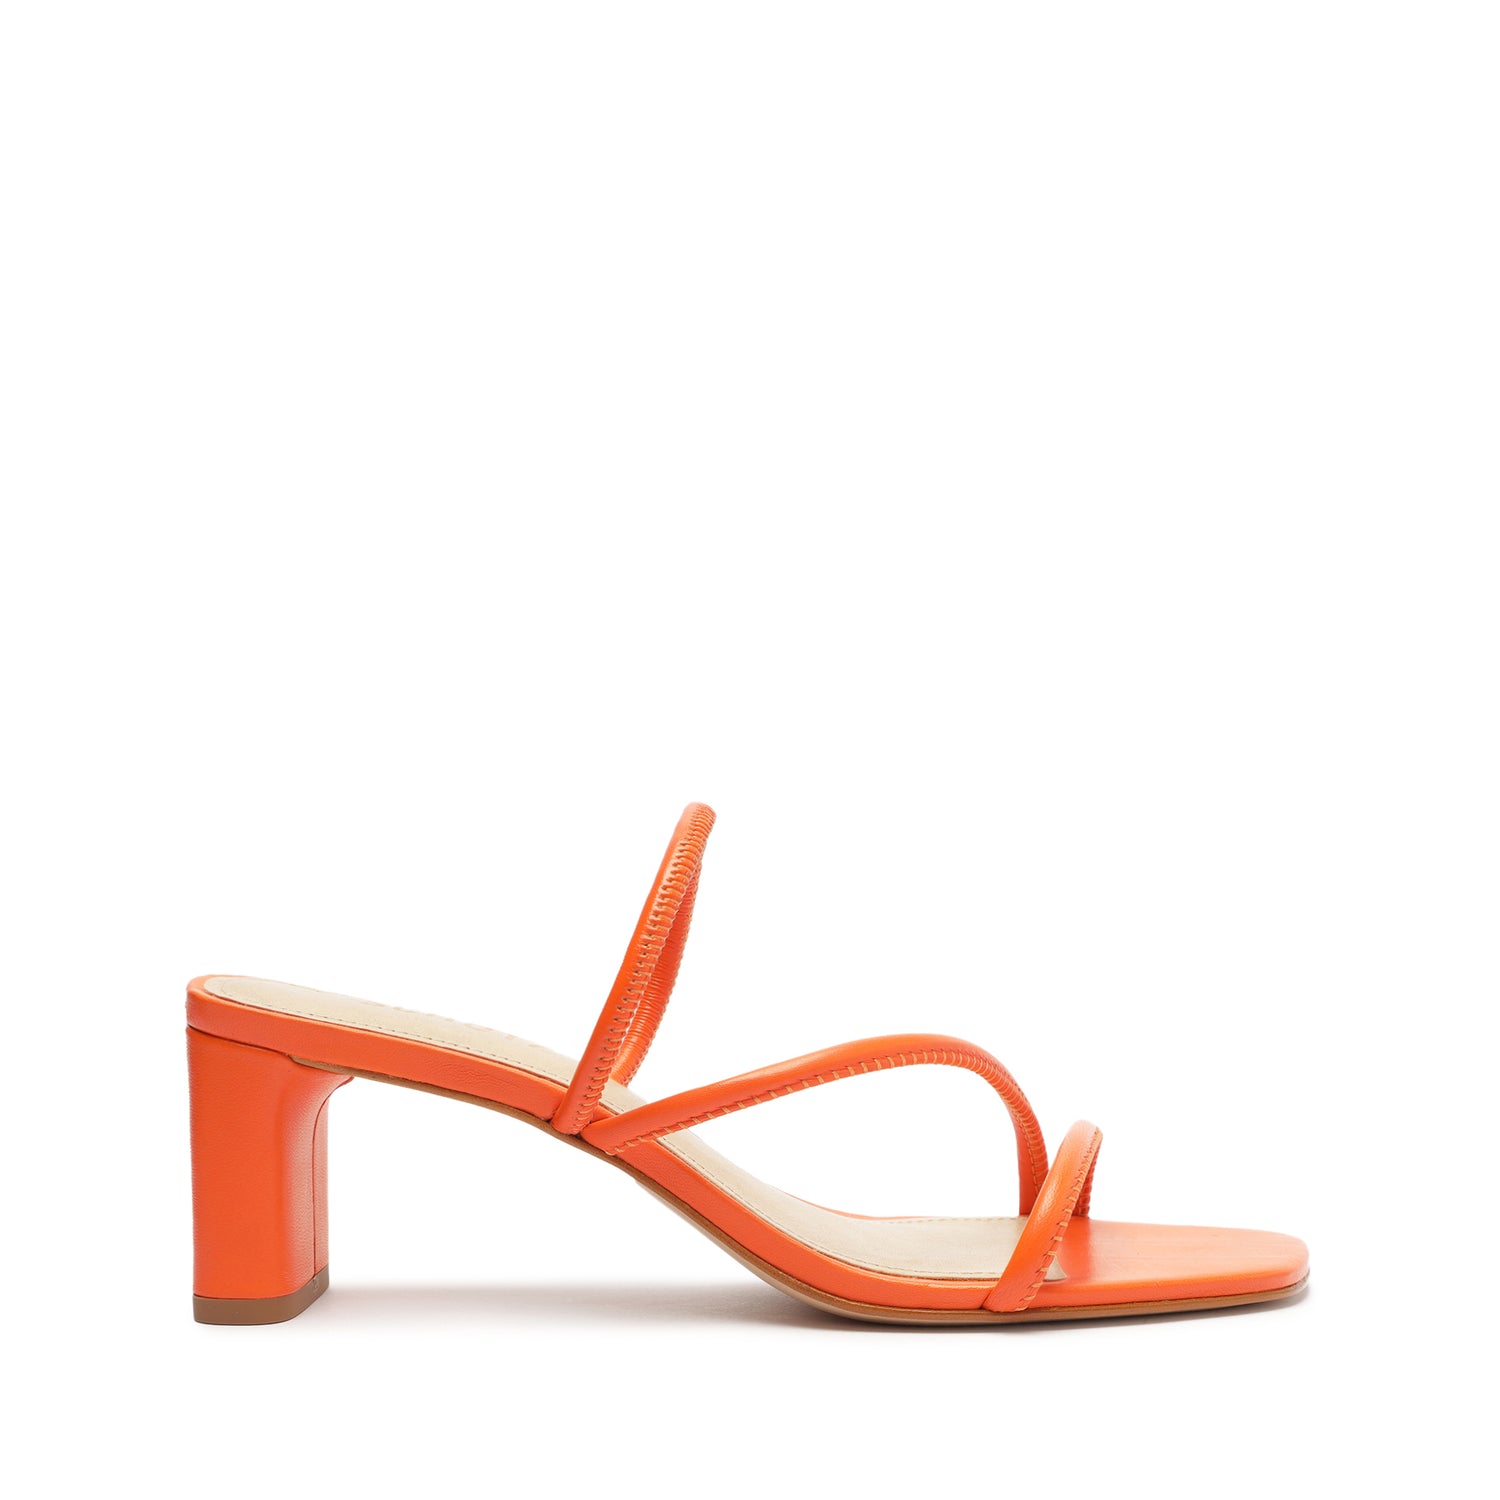 Chessie Mid Nappa Leather Sandal Sandals Spring 23 5 Flame Orange Nappa Leather - Schutz Shoes